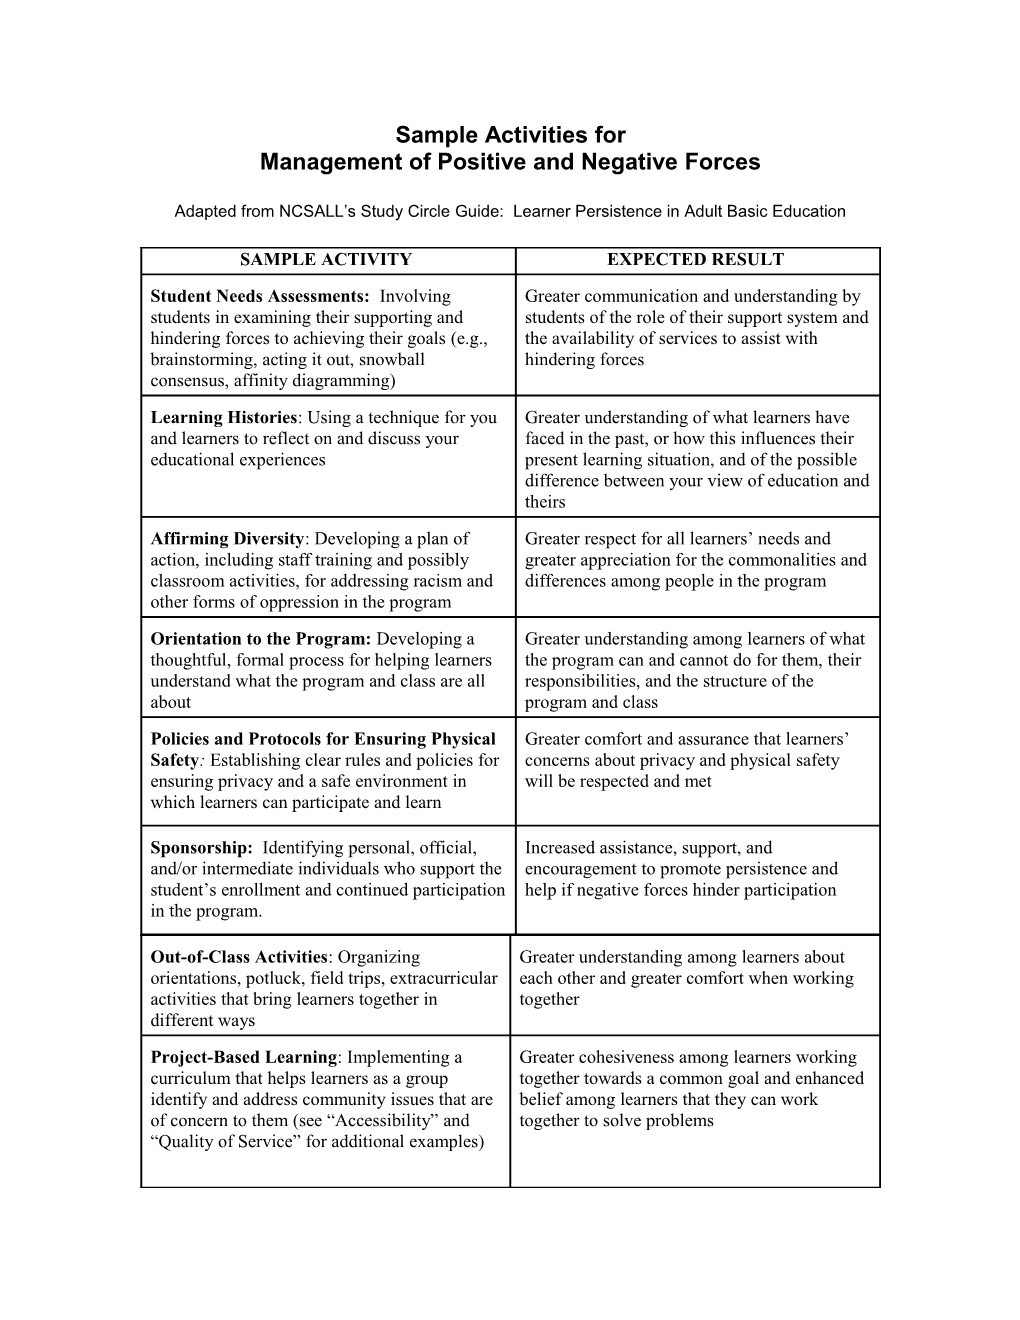 Management of Positive and Negative Forces